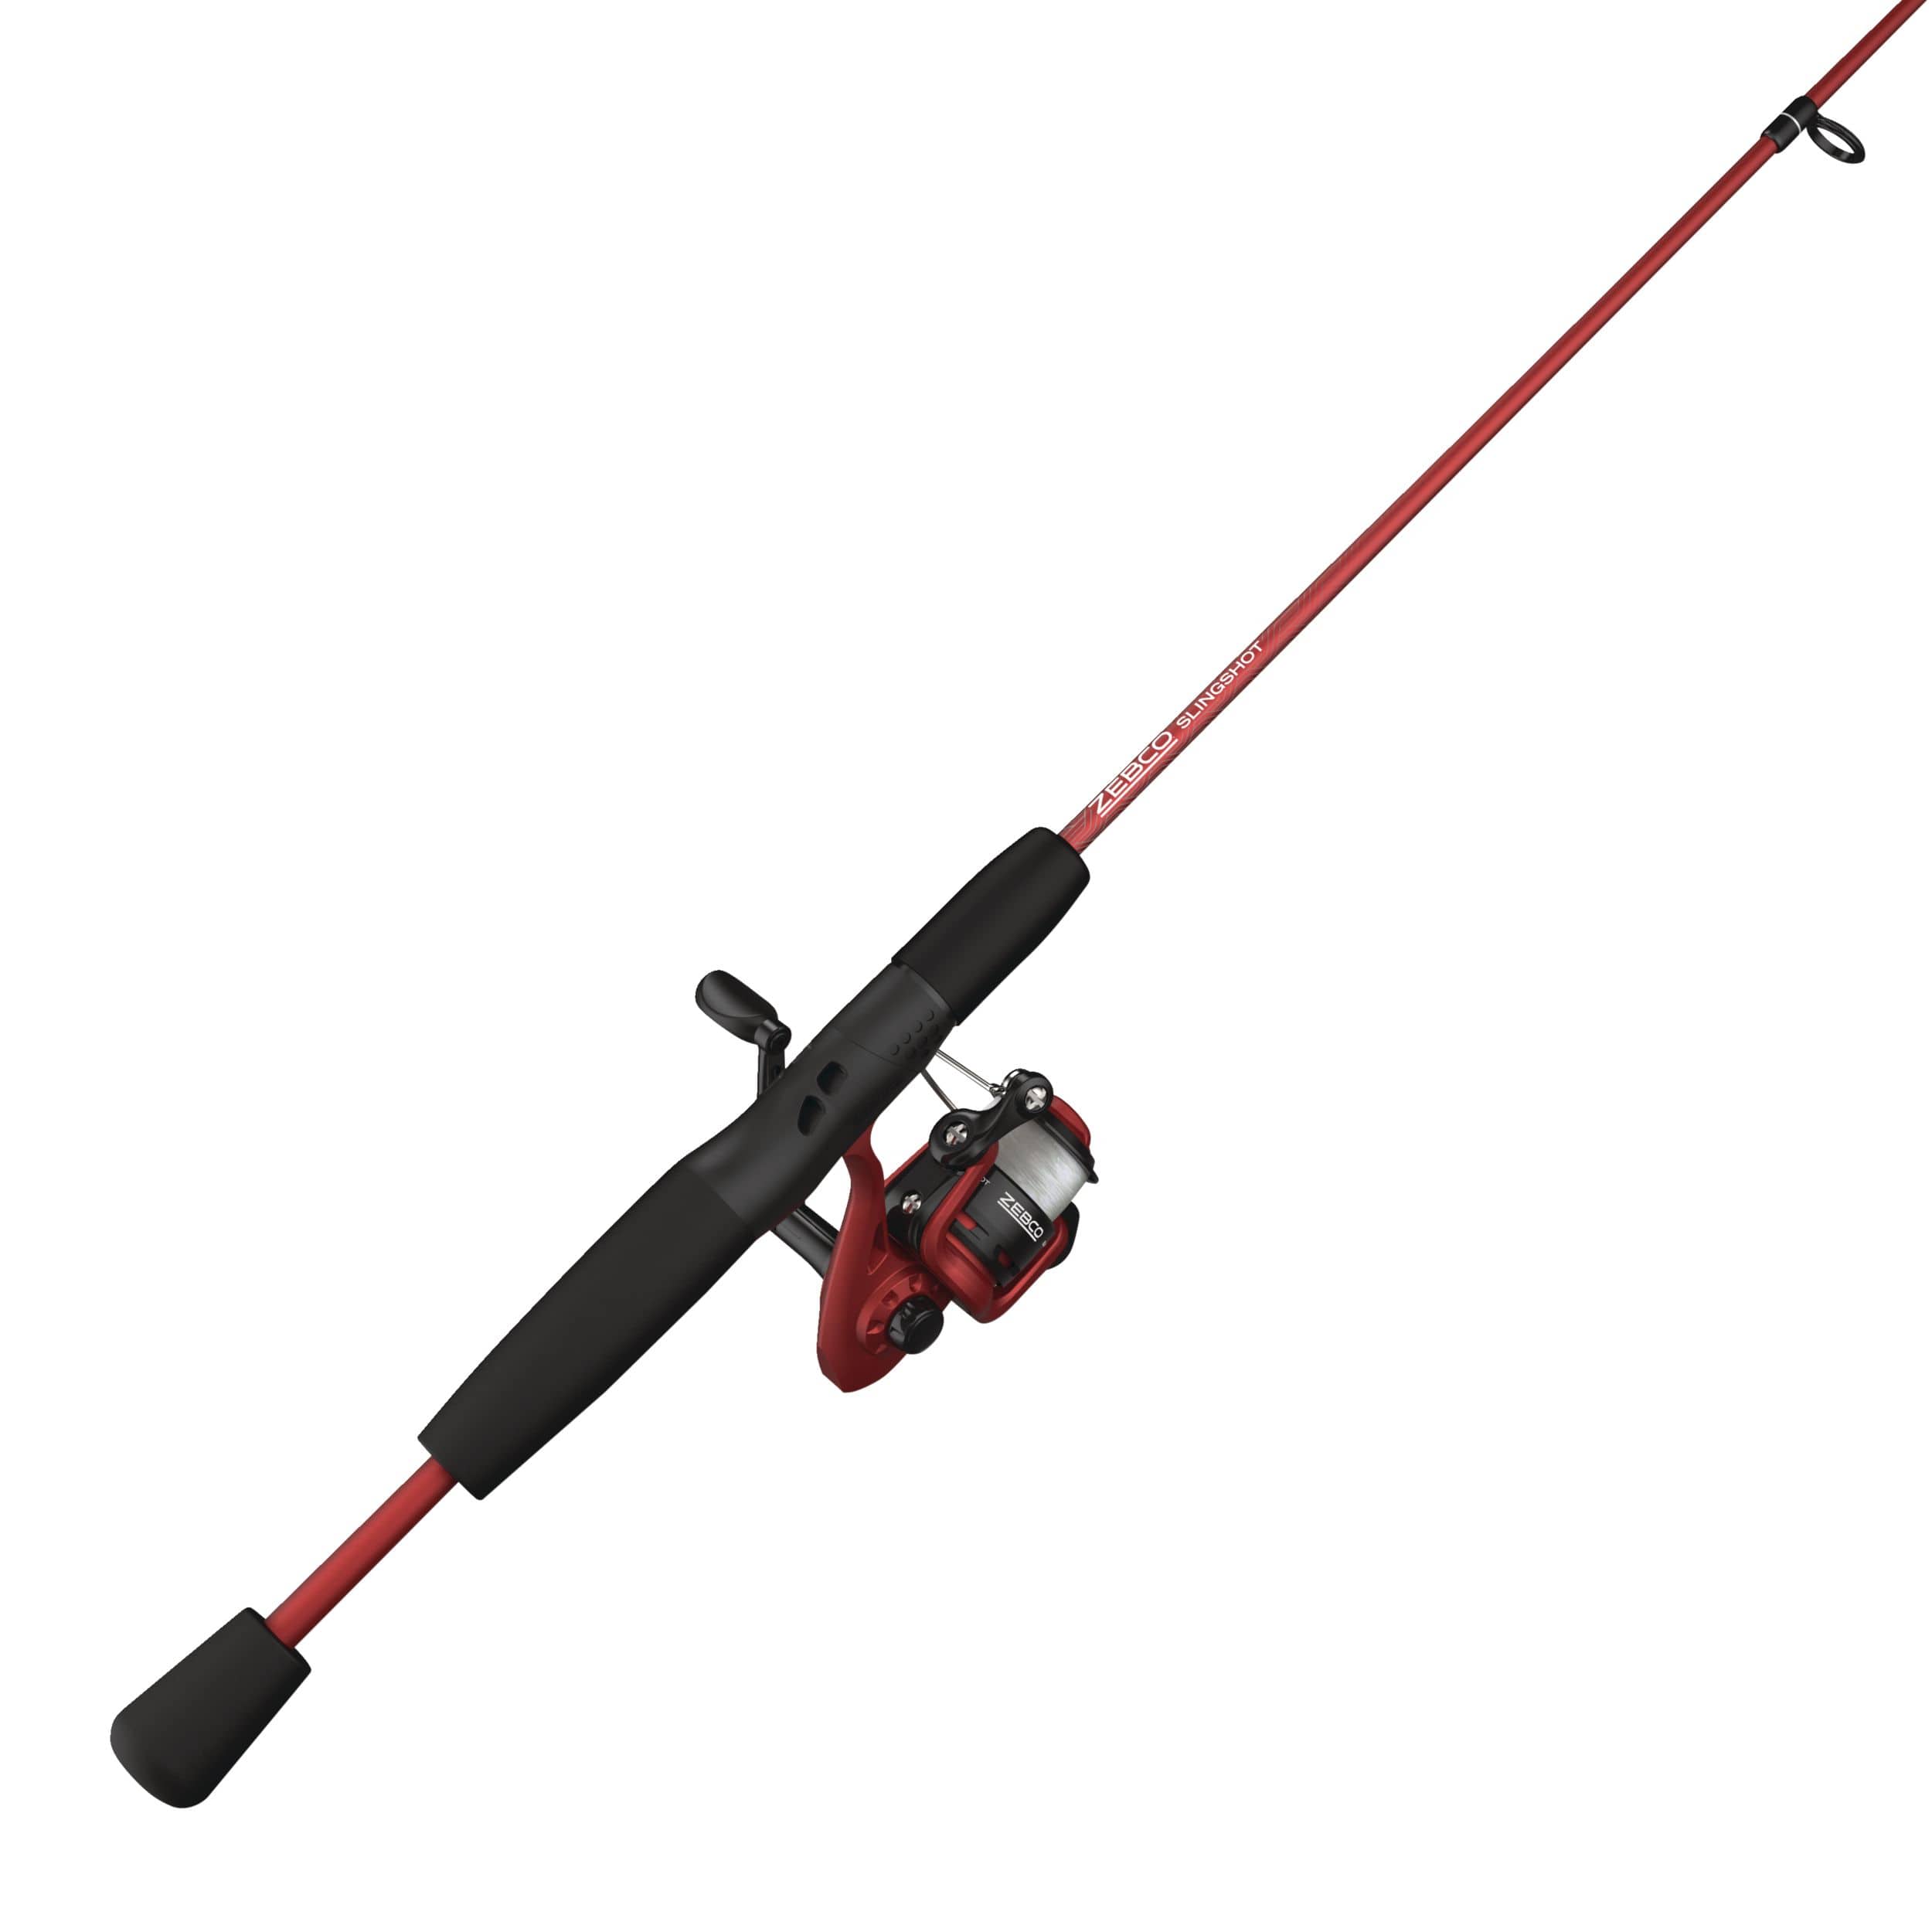 Zebco Splash Spinning Reel and Fishing Rod Combo, 6-Foot 2